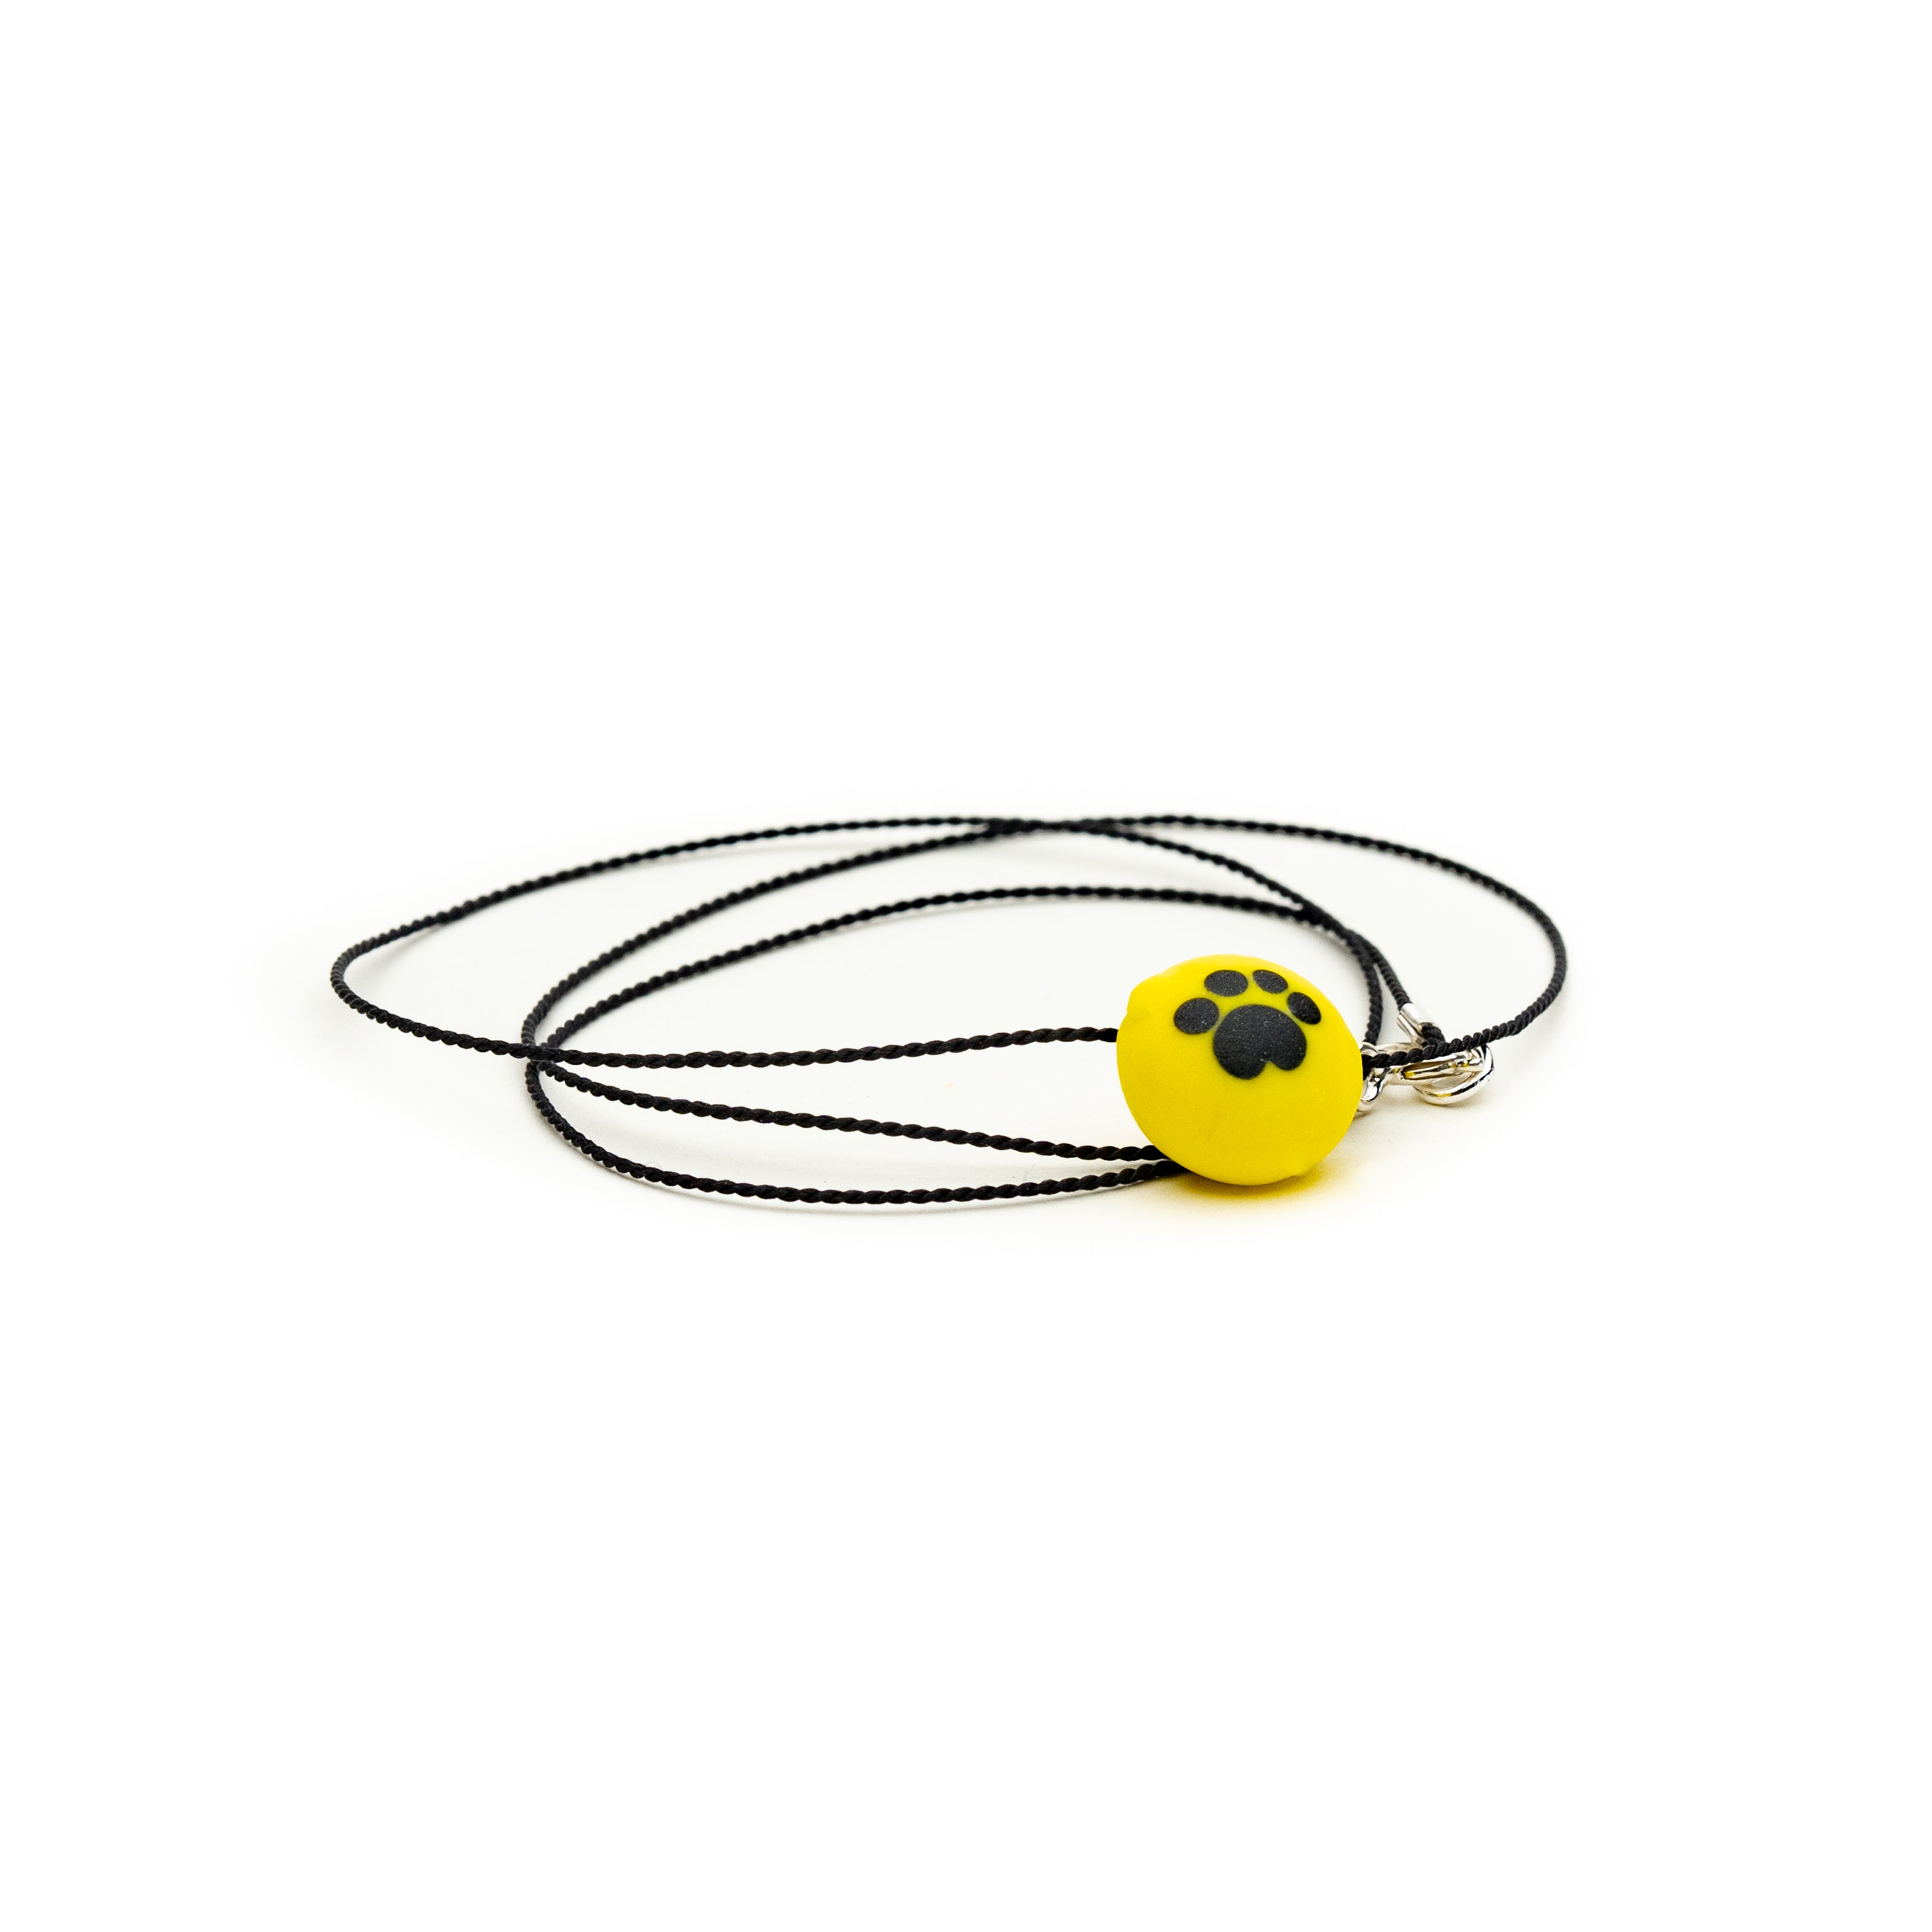 The Dogs Trust Charity Pebble Necklace